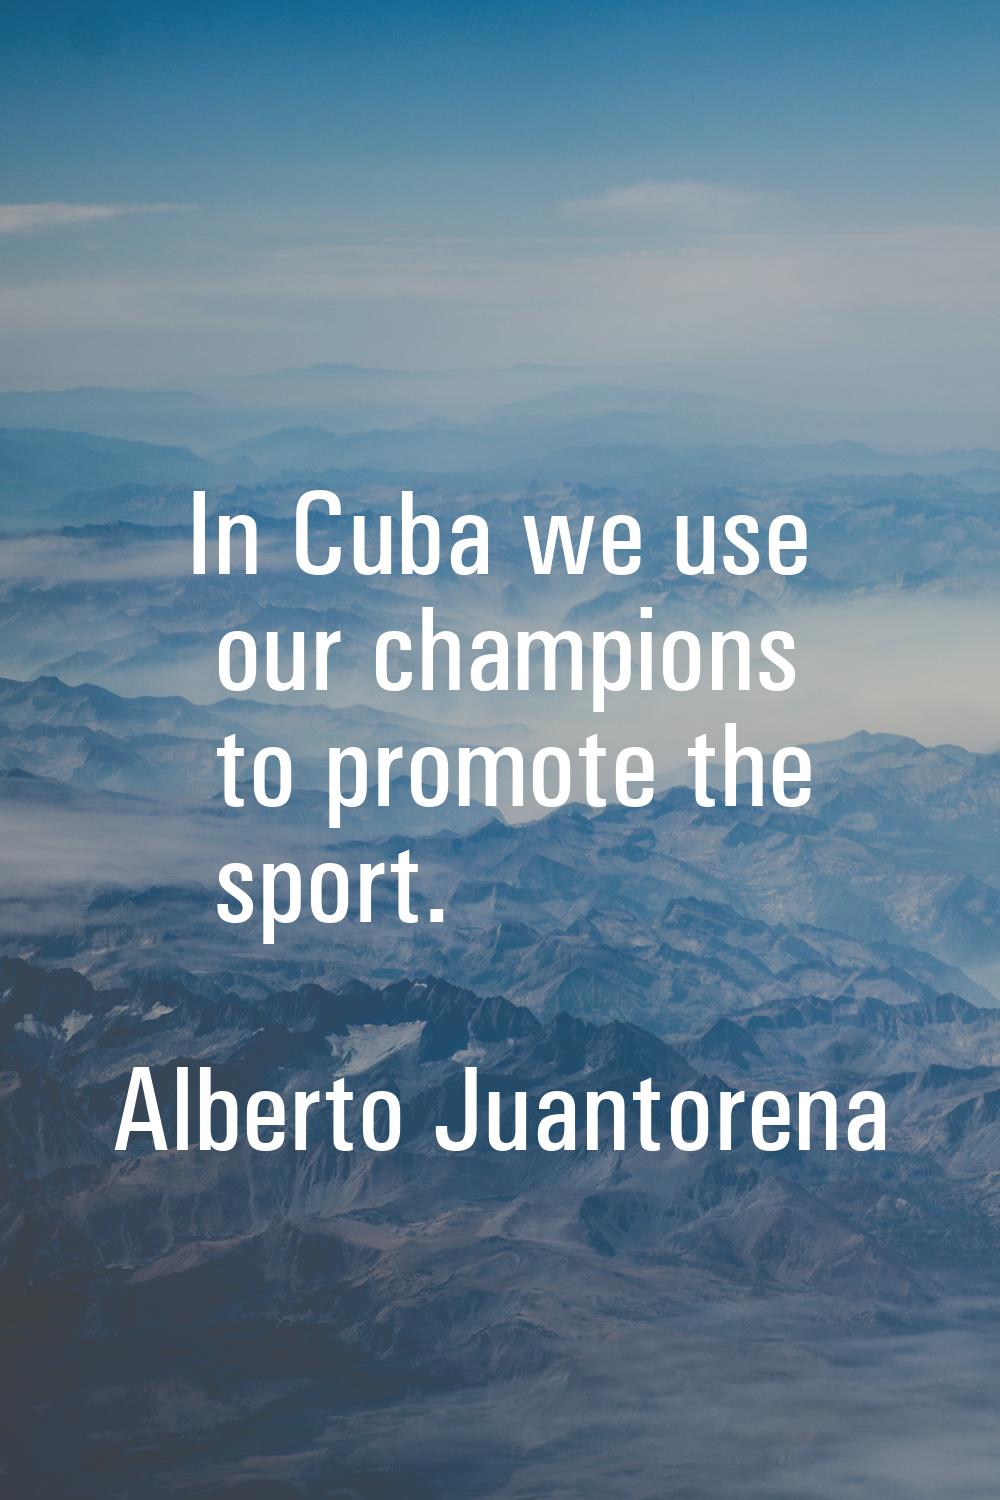 In Cuba we use our champions to promote the sport.